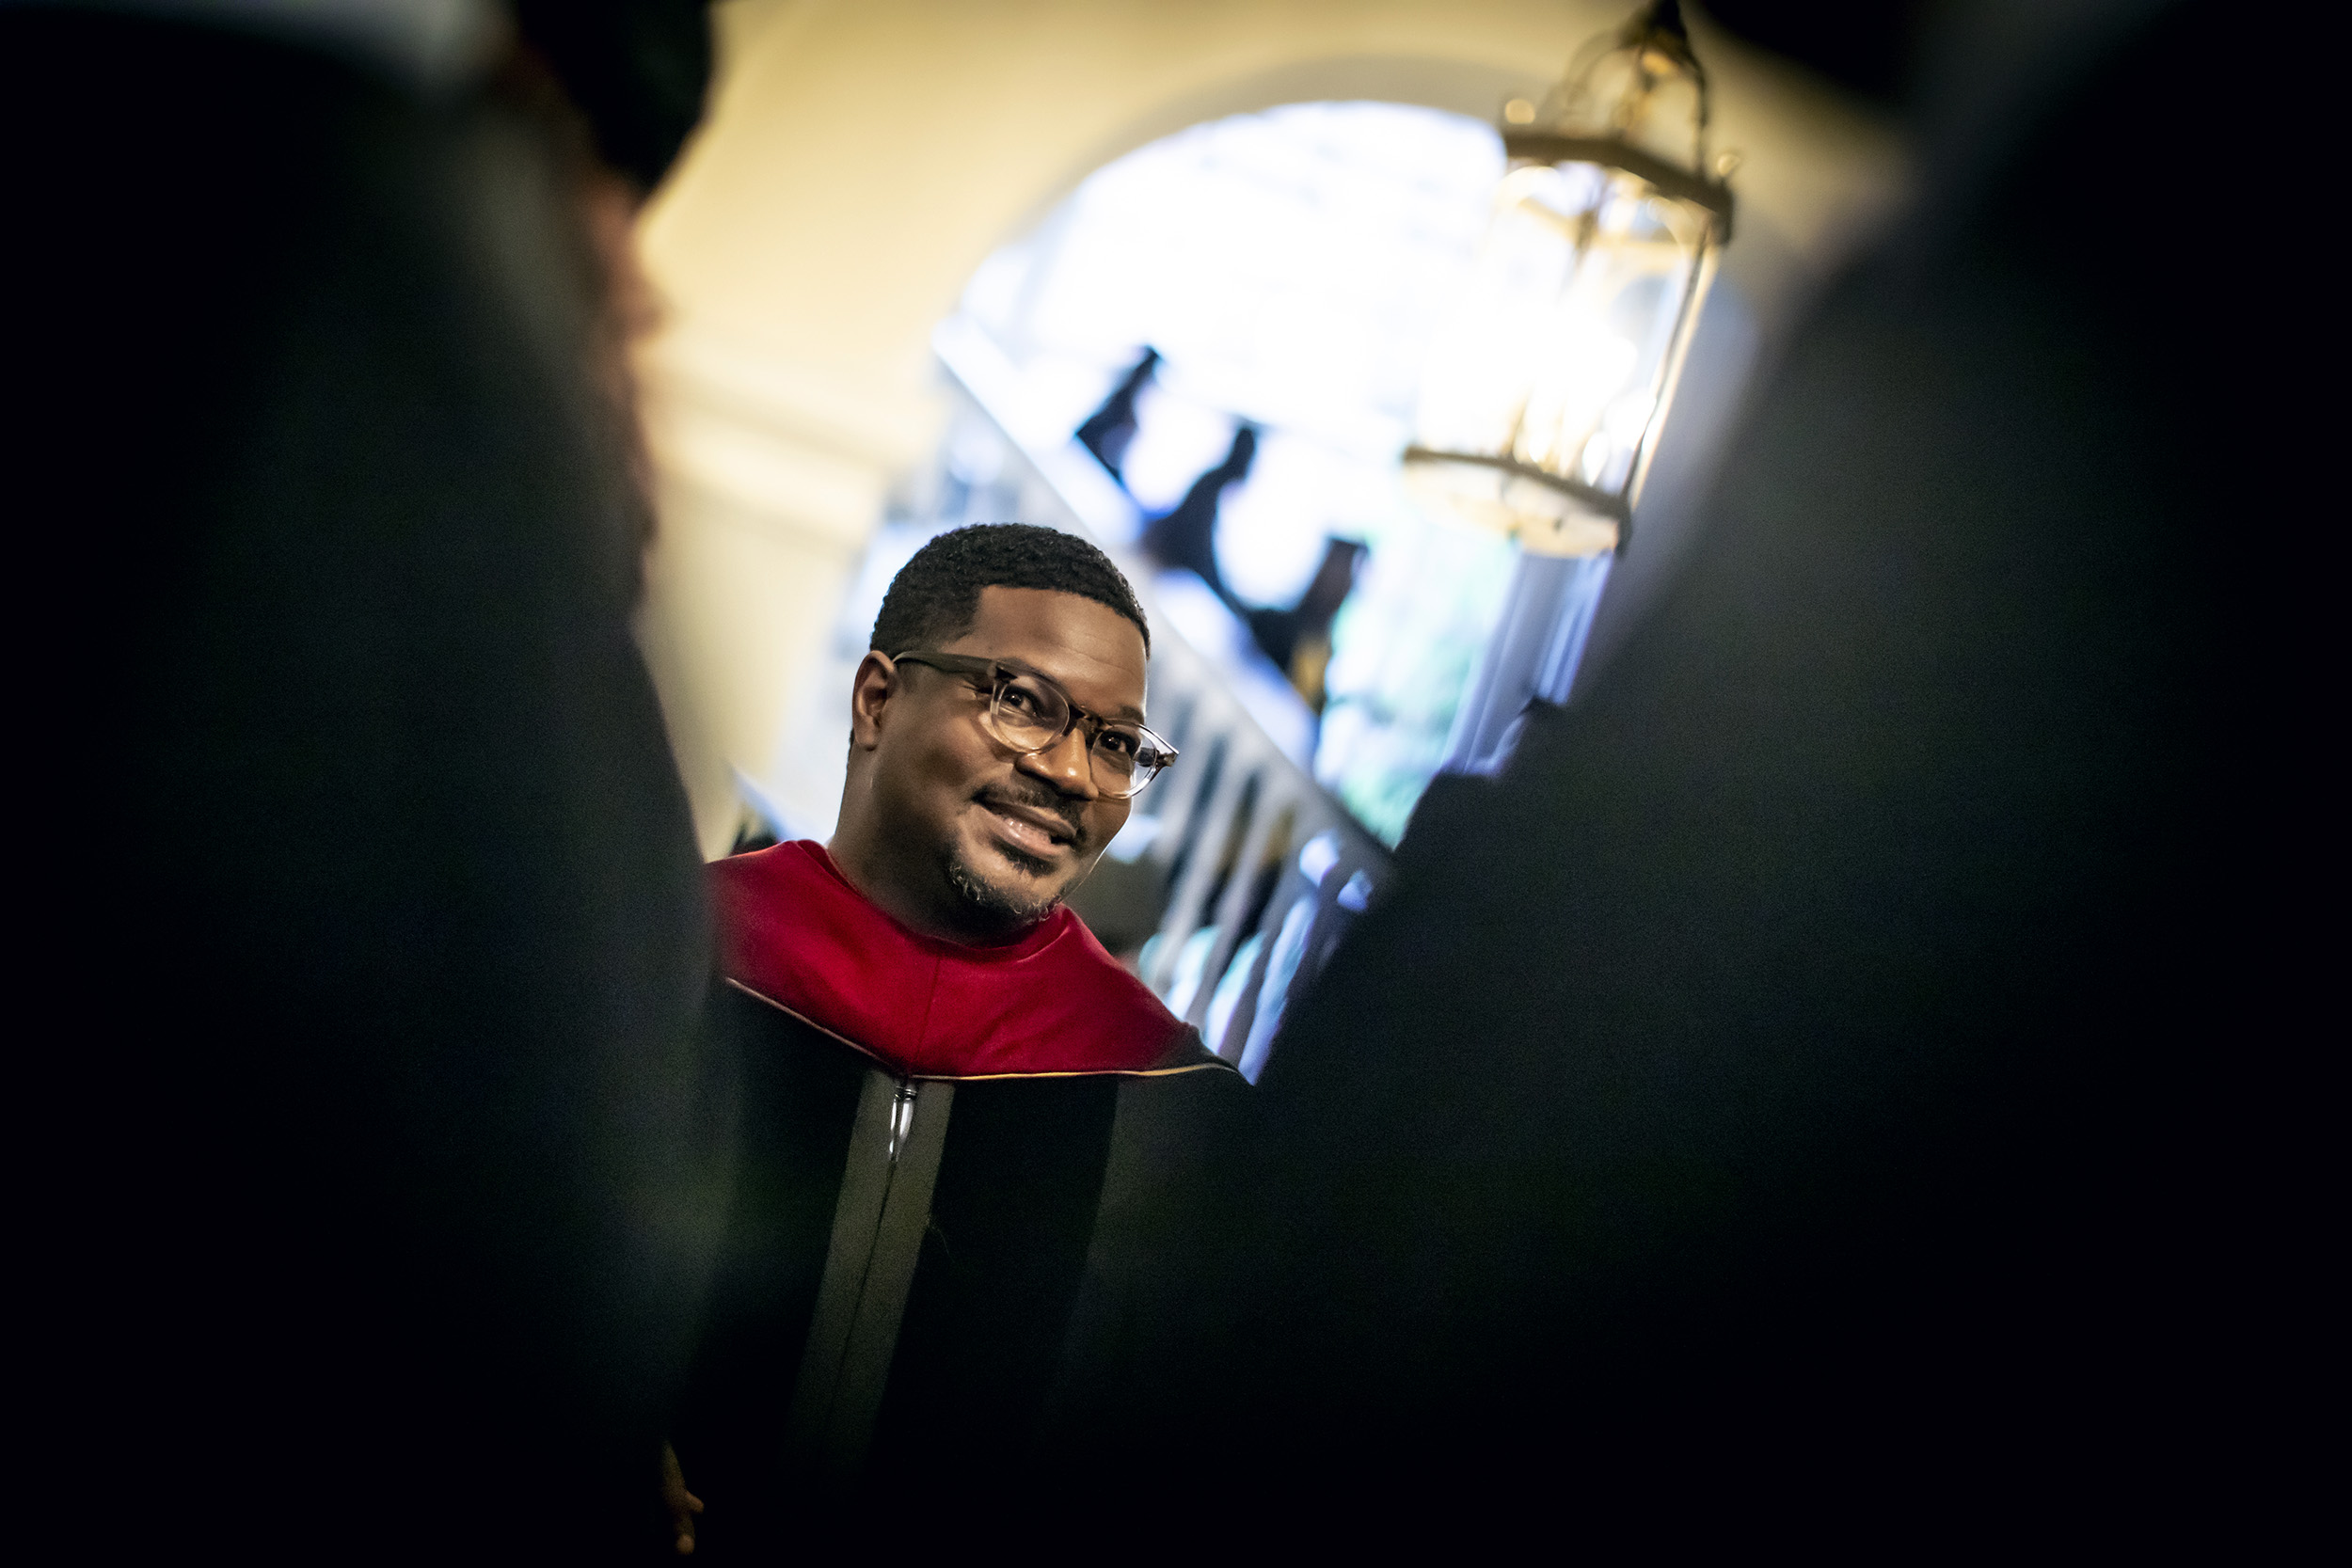 Johnathan Walton in Memorial Church during the Baccalaureate Service.